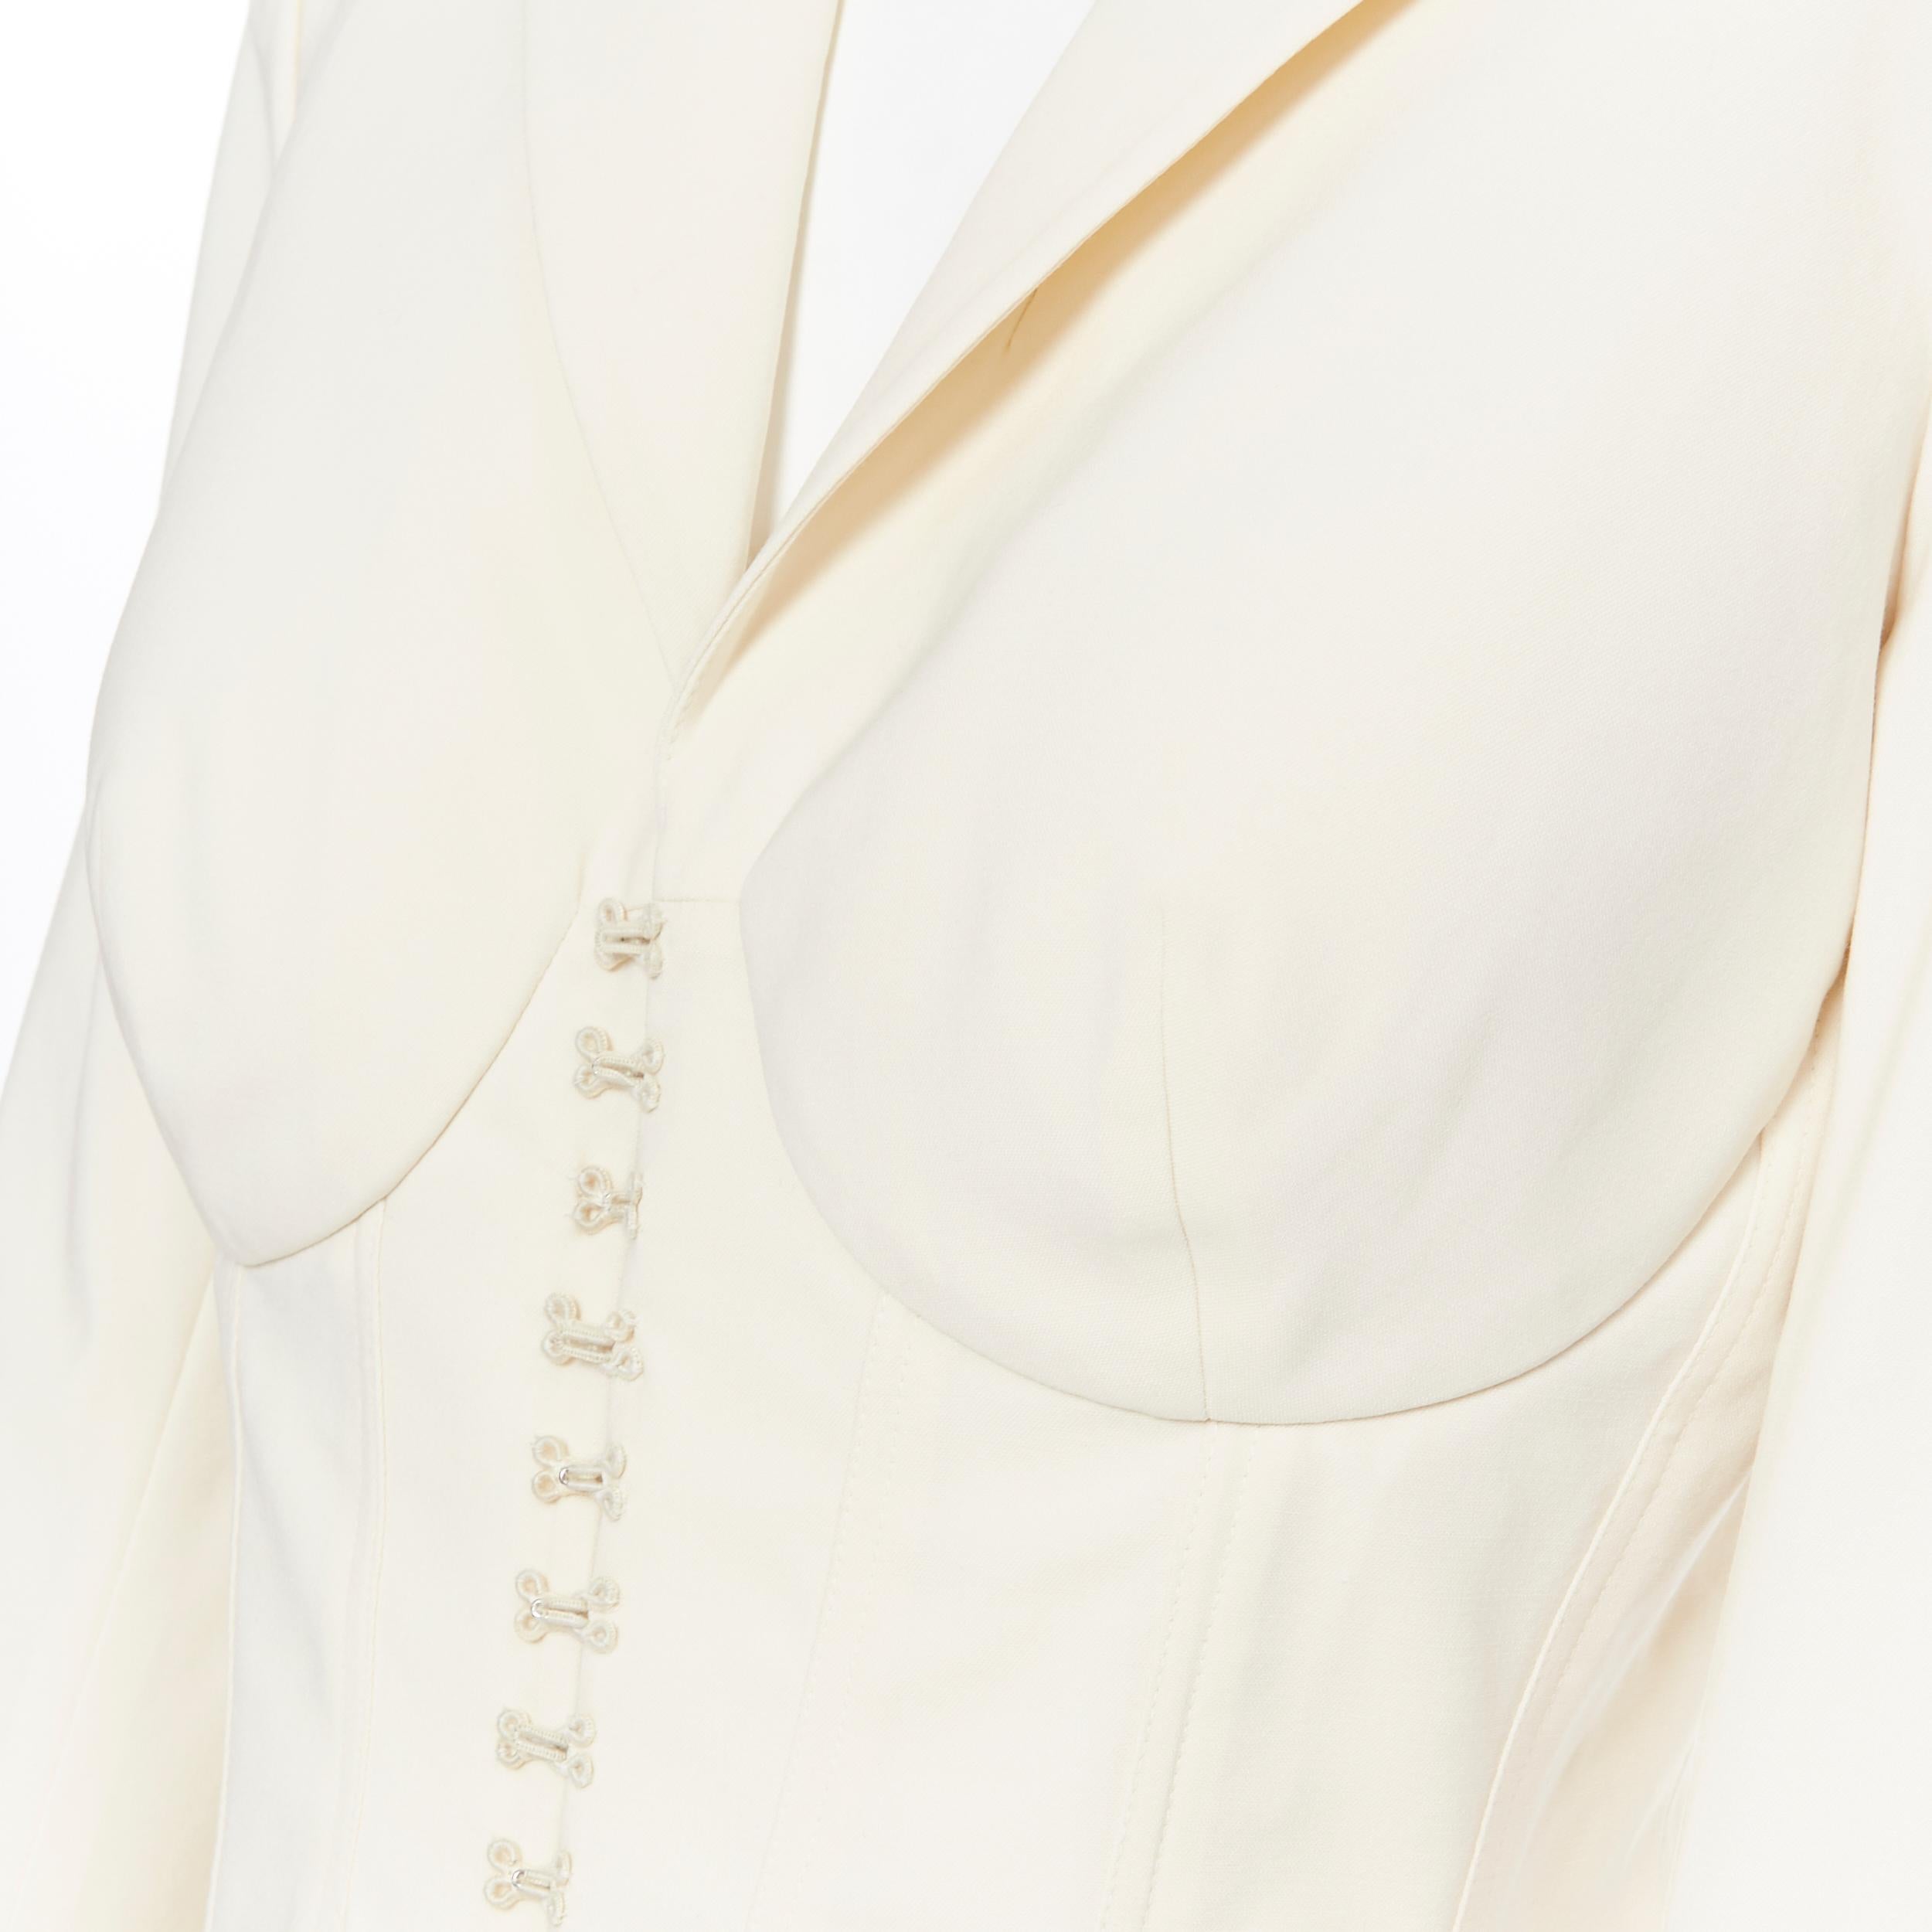 new LA PERLA SS17 Runway Corset Jacket cream white stretch wool blazer IT42 C
Brand: La Perla
Collection: Spring Summer 2017
As seen on: Kendall Jenner 
Model Name / Style: Corset jacket
Material: Wool
Color: White; cream ivory
Pattern: